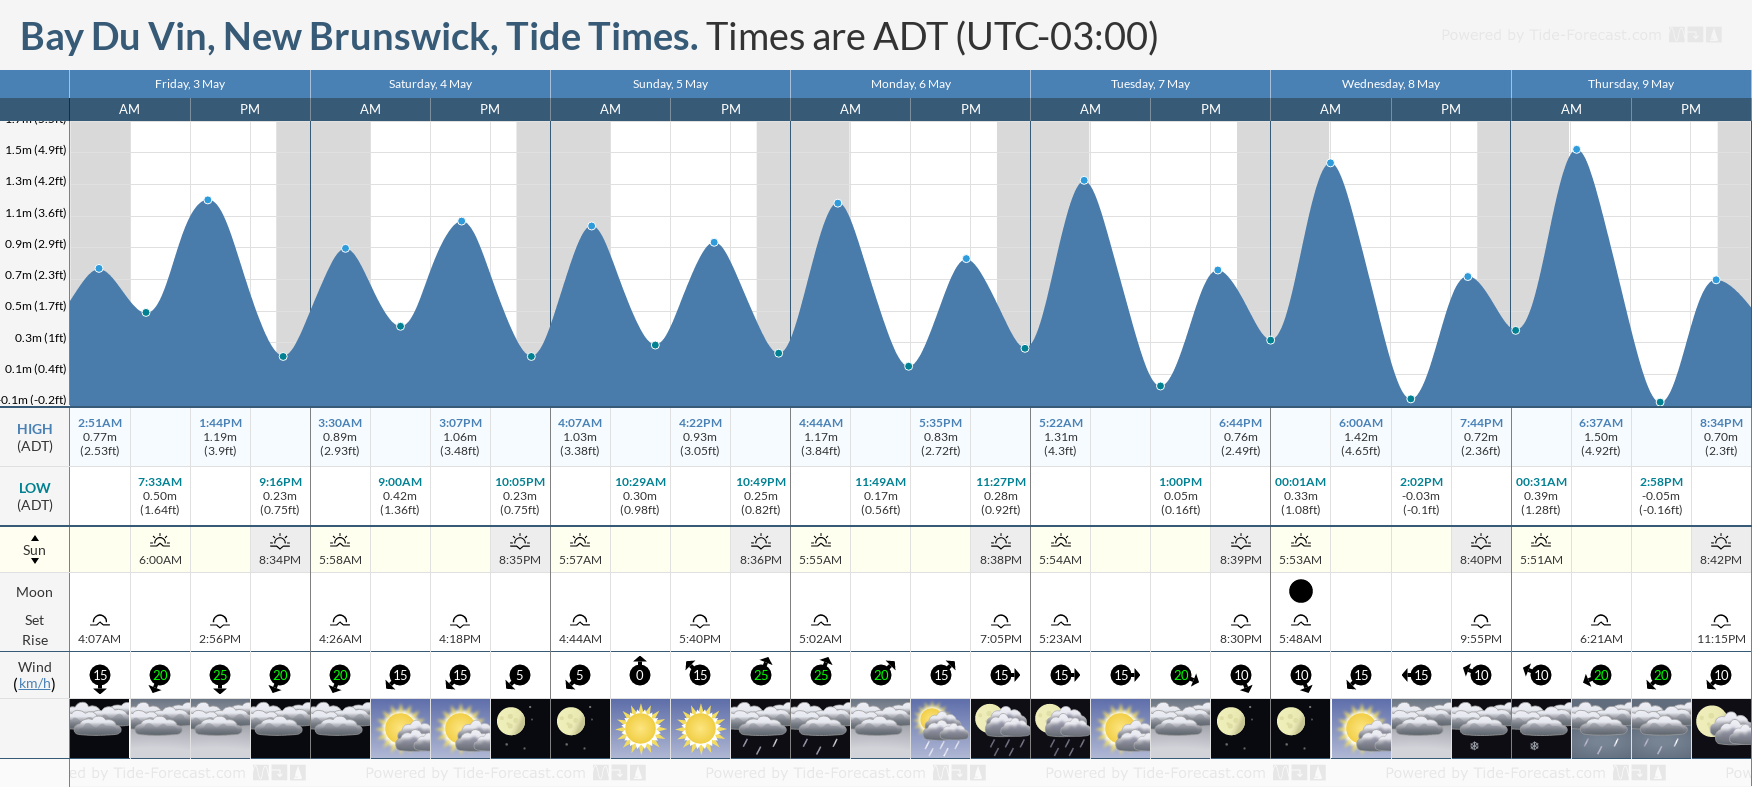 Bay Du Vin, New Brunswick Tide Chart including high and low tide tide times for the next 7 days